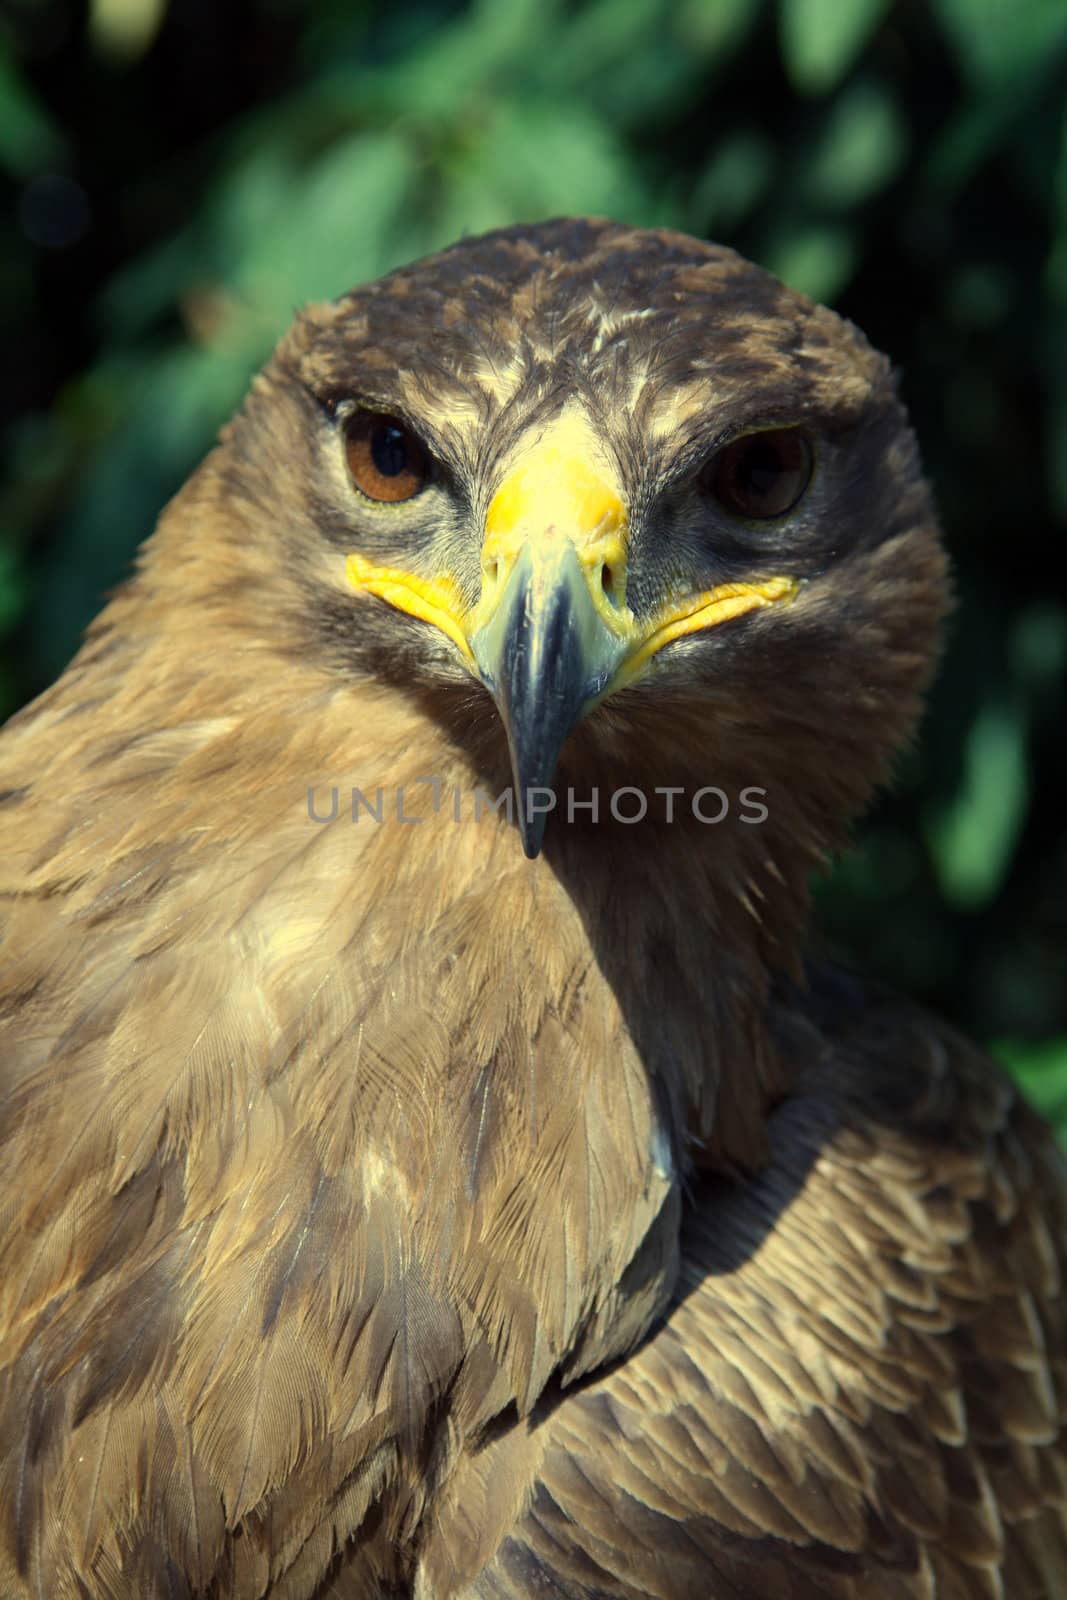 A golden eagle with a leafy environment